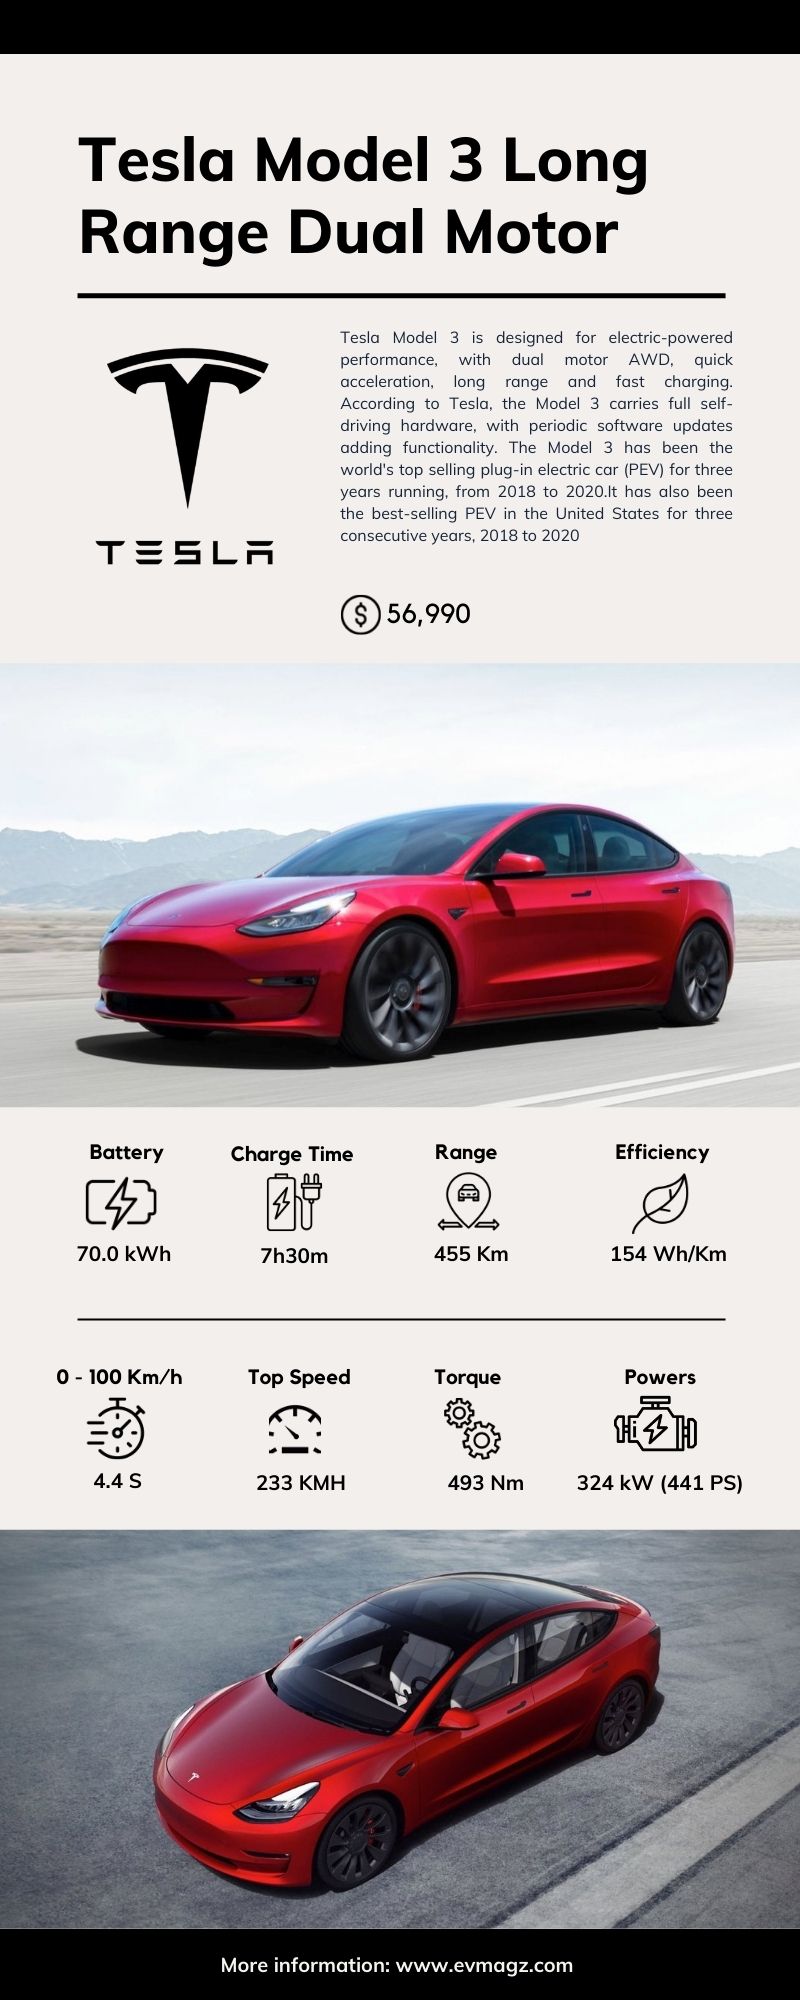 Tesla Model 3 Long Range Dual Motor Price and Specifications [Infographic]